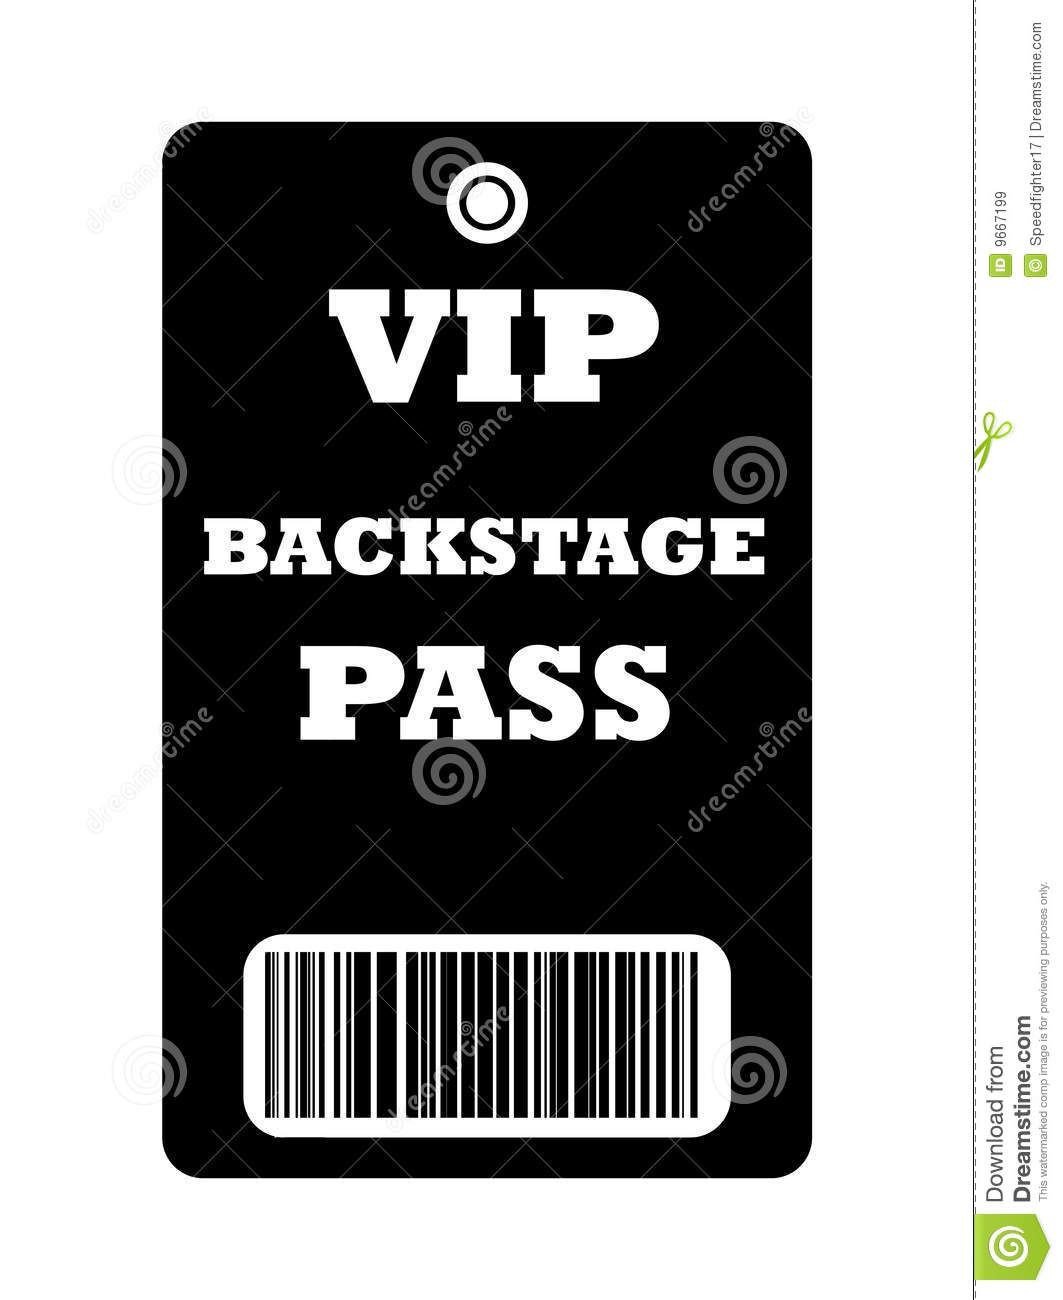 Image result for vip backstage pass vinyl VIP